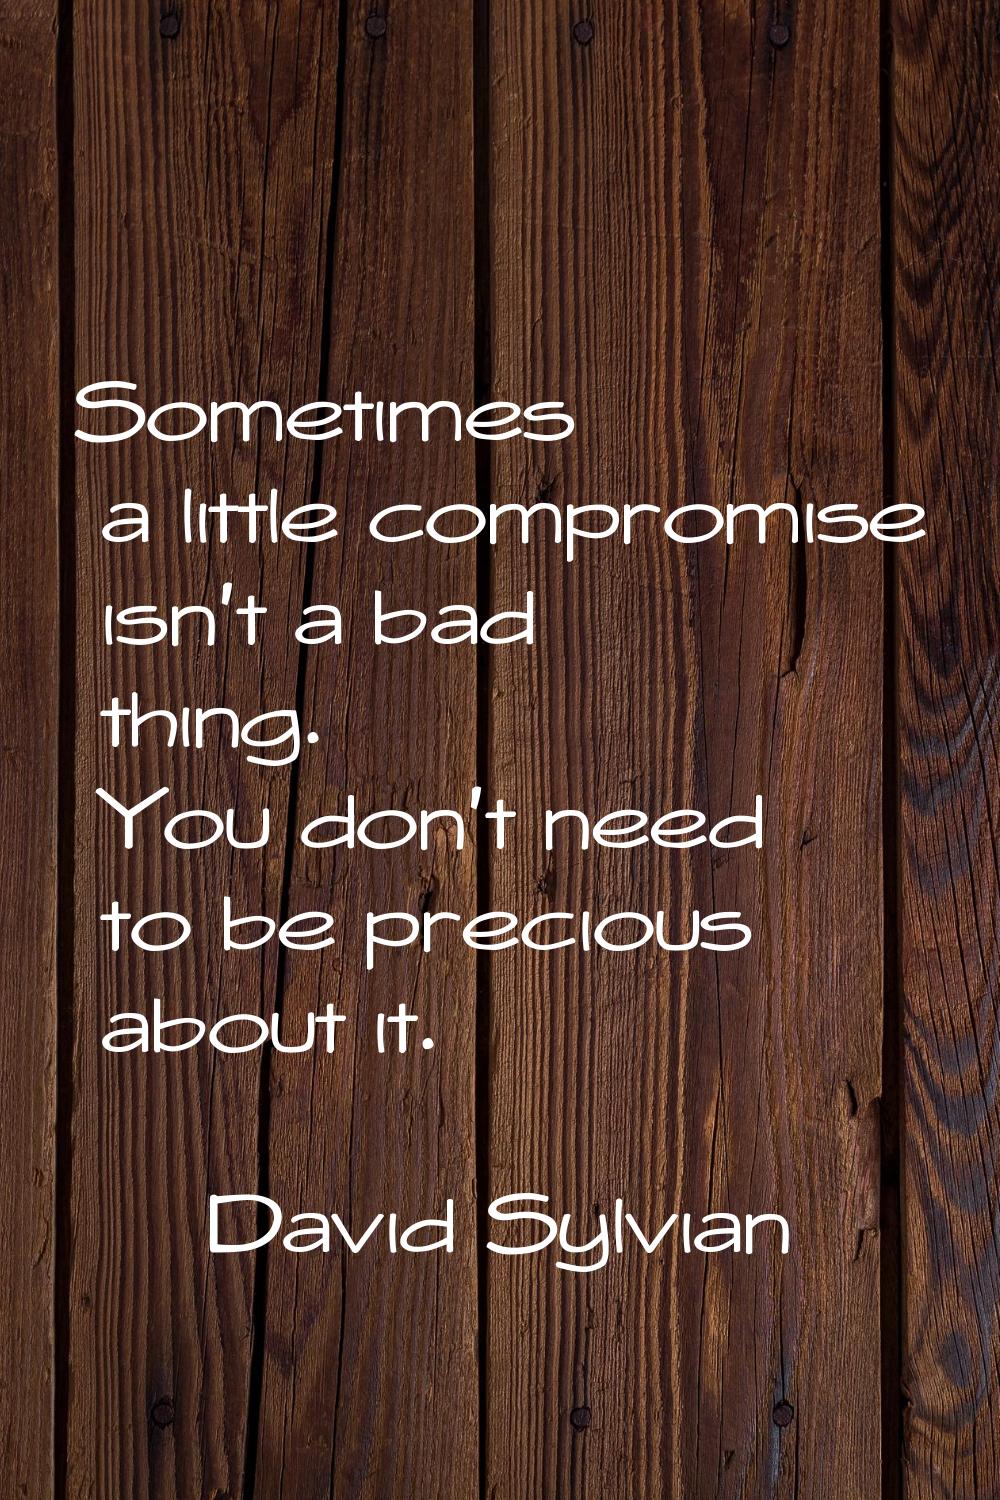 Sometimes a little compromise isn't a bad thing. You don't need to be precious about it.